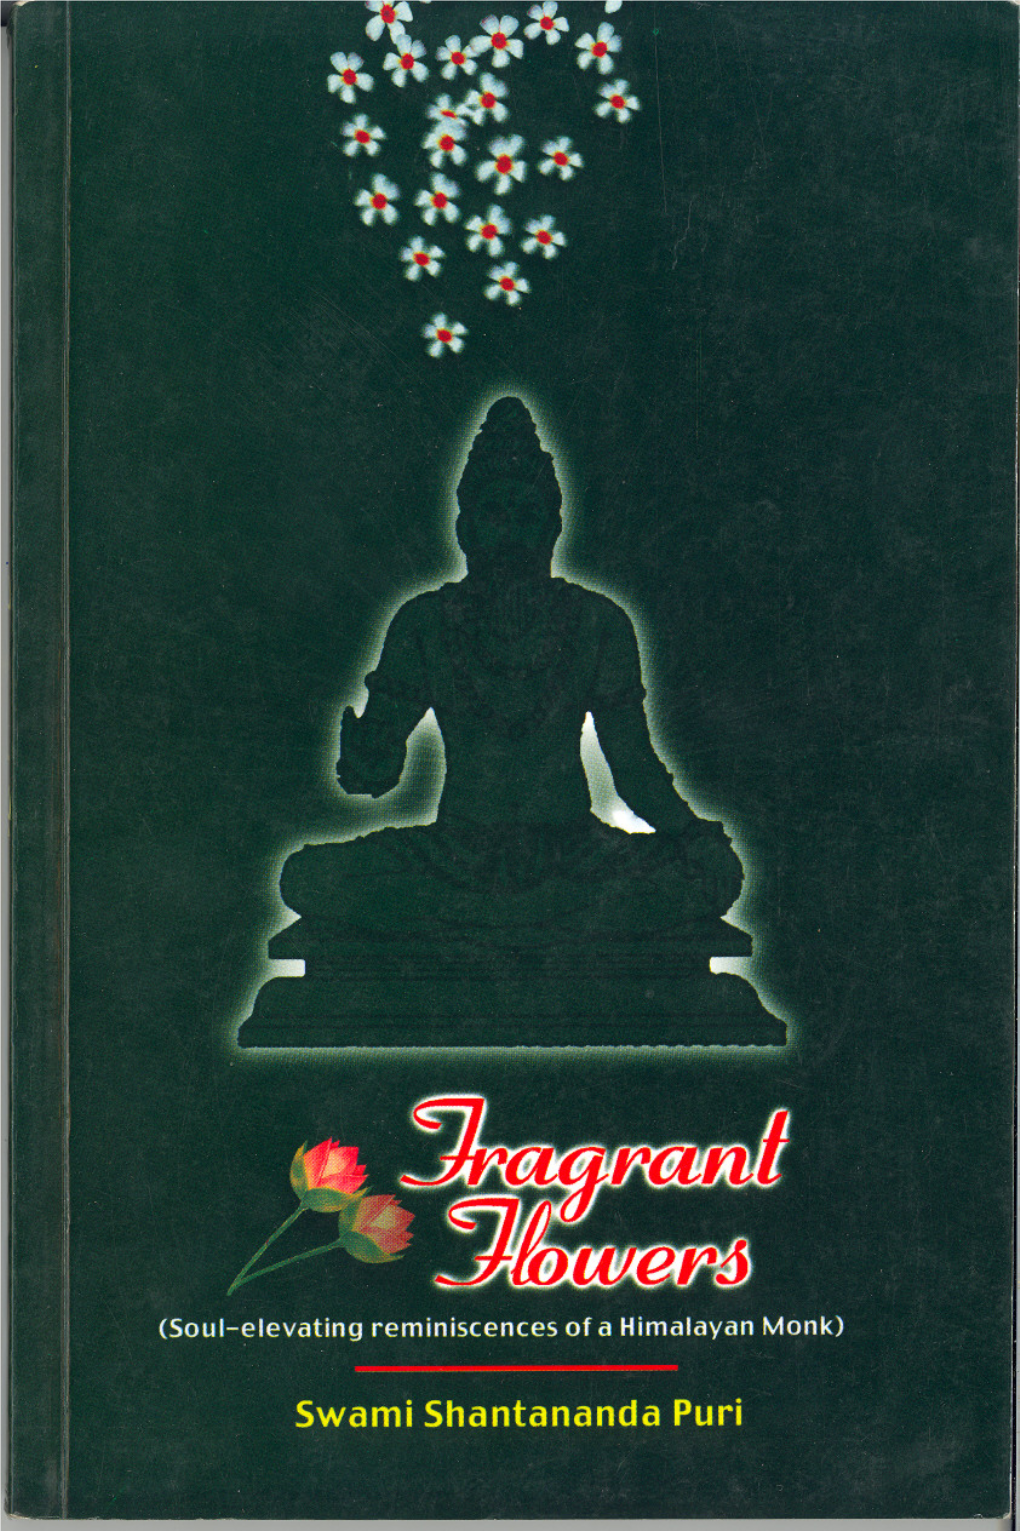 FRAGRANT FLOWERS (Soul-Elevating Reminiscences of a Himalayan Monk) by Swami Shantananda Puri